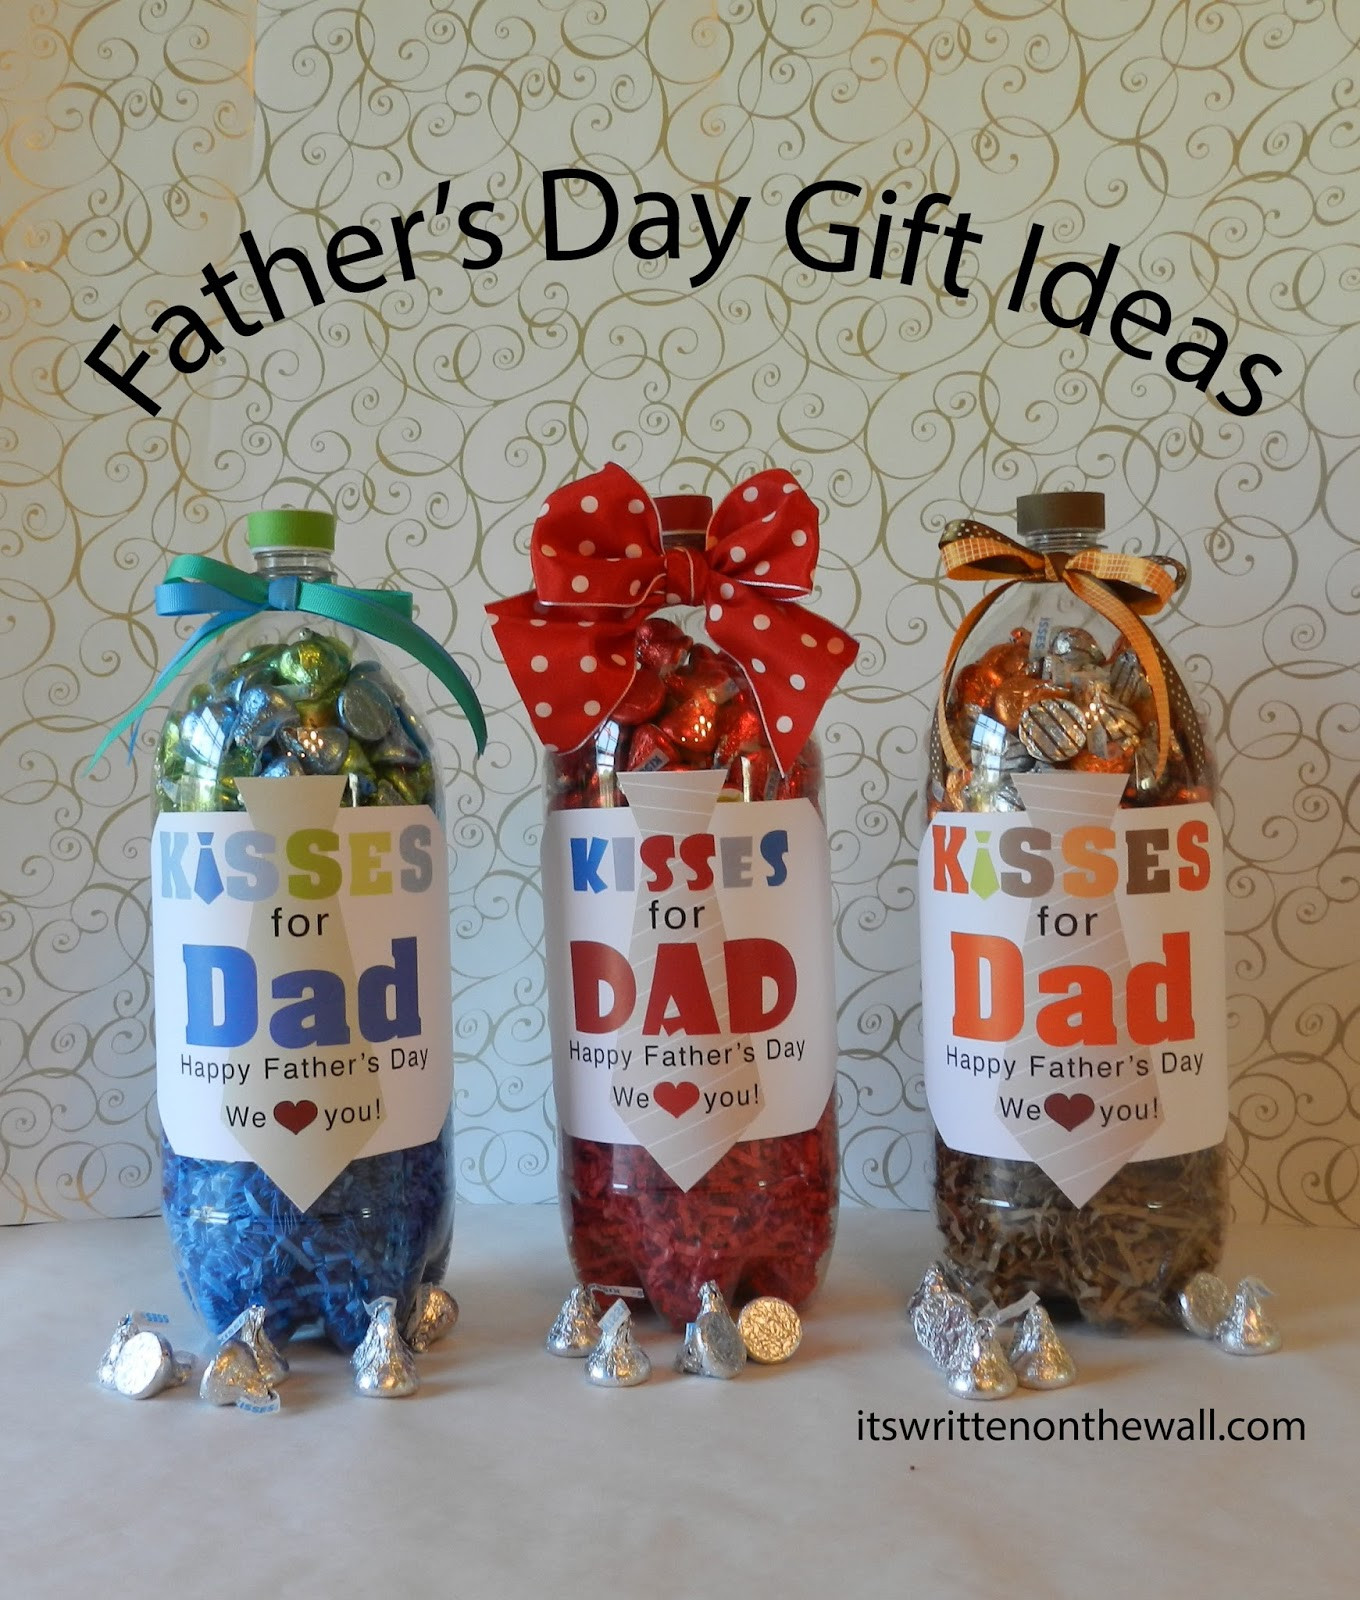 Fathers Day Presents Ideas
 It s Written on the Wall Fathers Day Gift Ideas For the